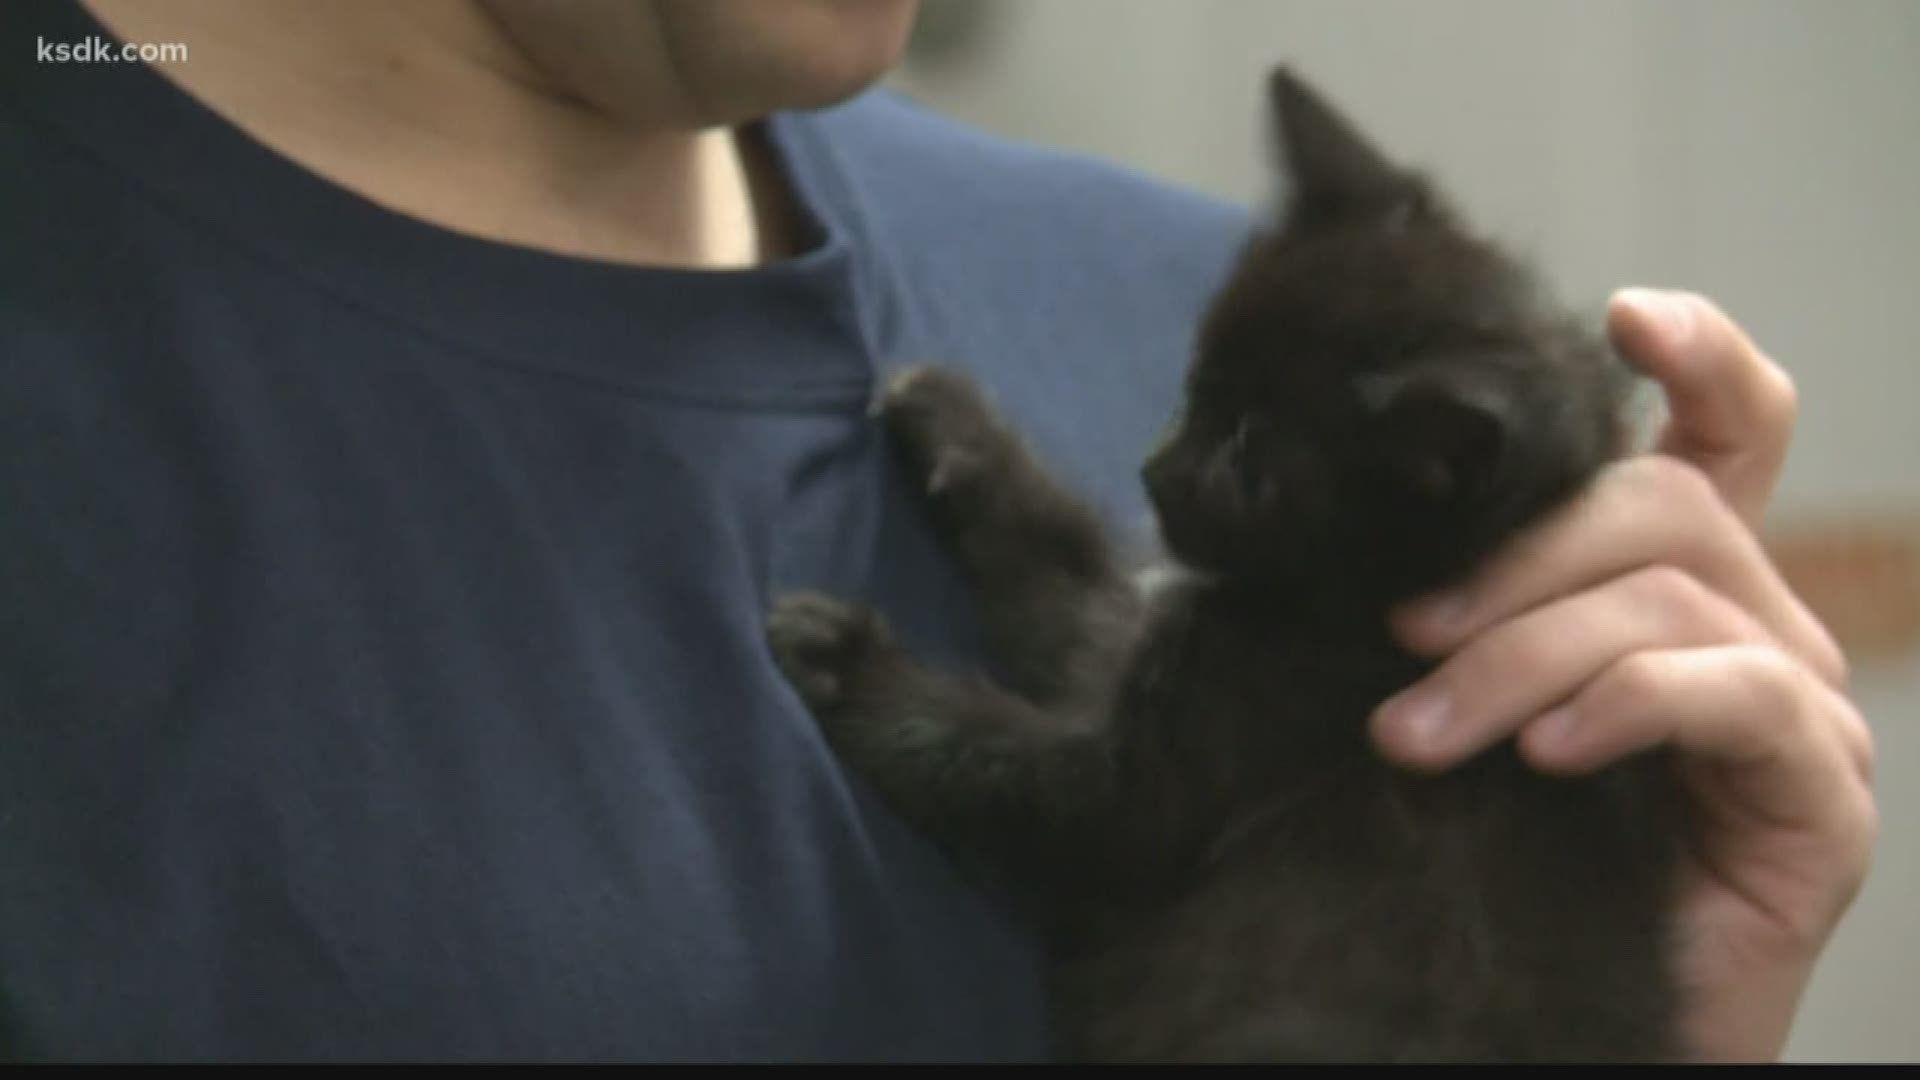 Five of the kittens were named after the firefighters who dug them out after they were swept into a storm drain.